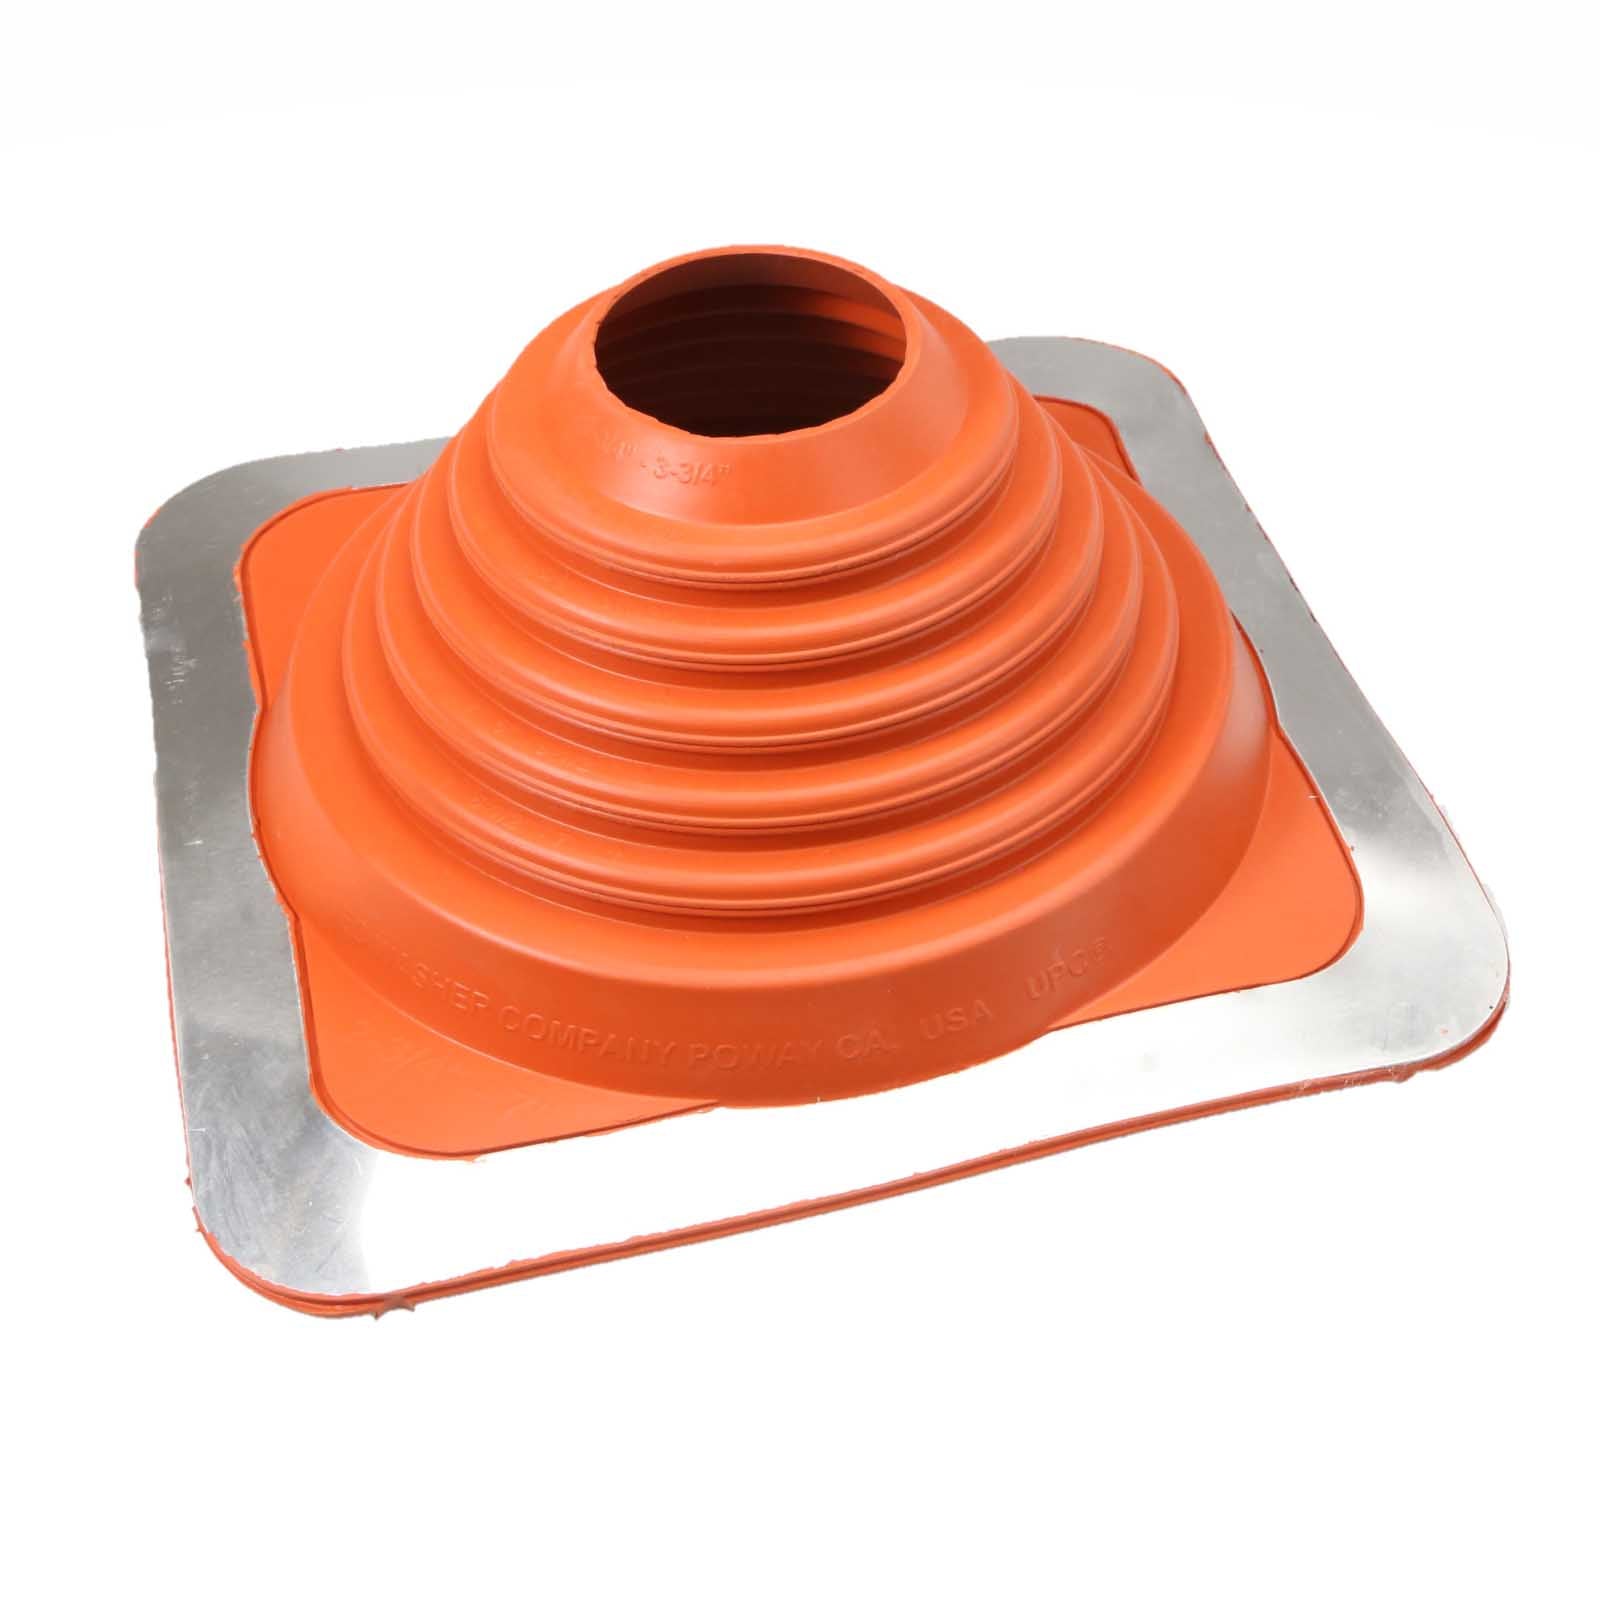 #4 Roofjack Square Silicone Pipe Flashing Boot Red